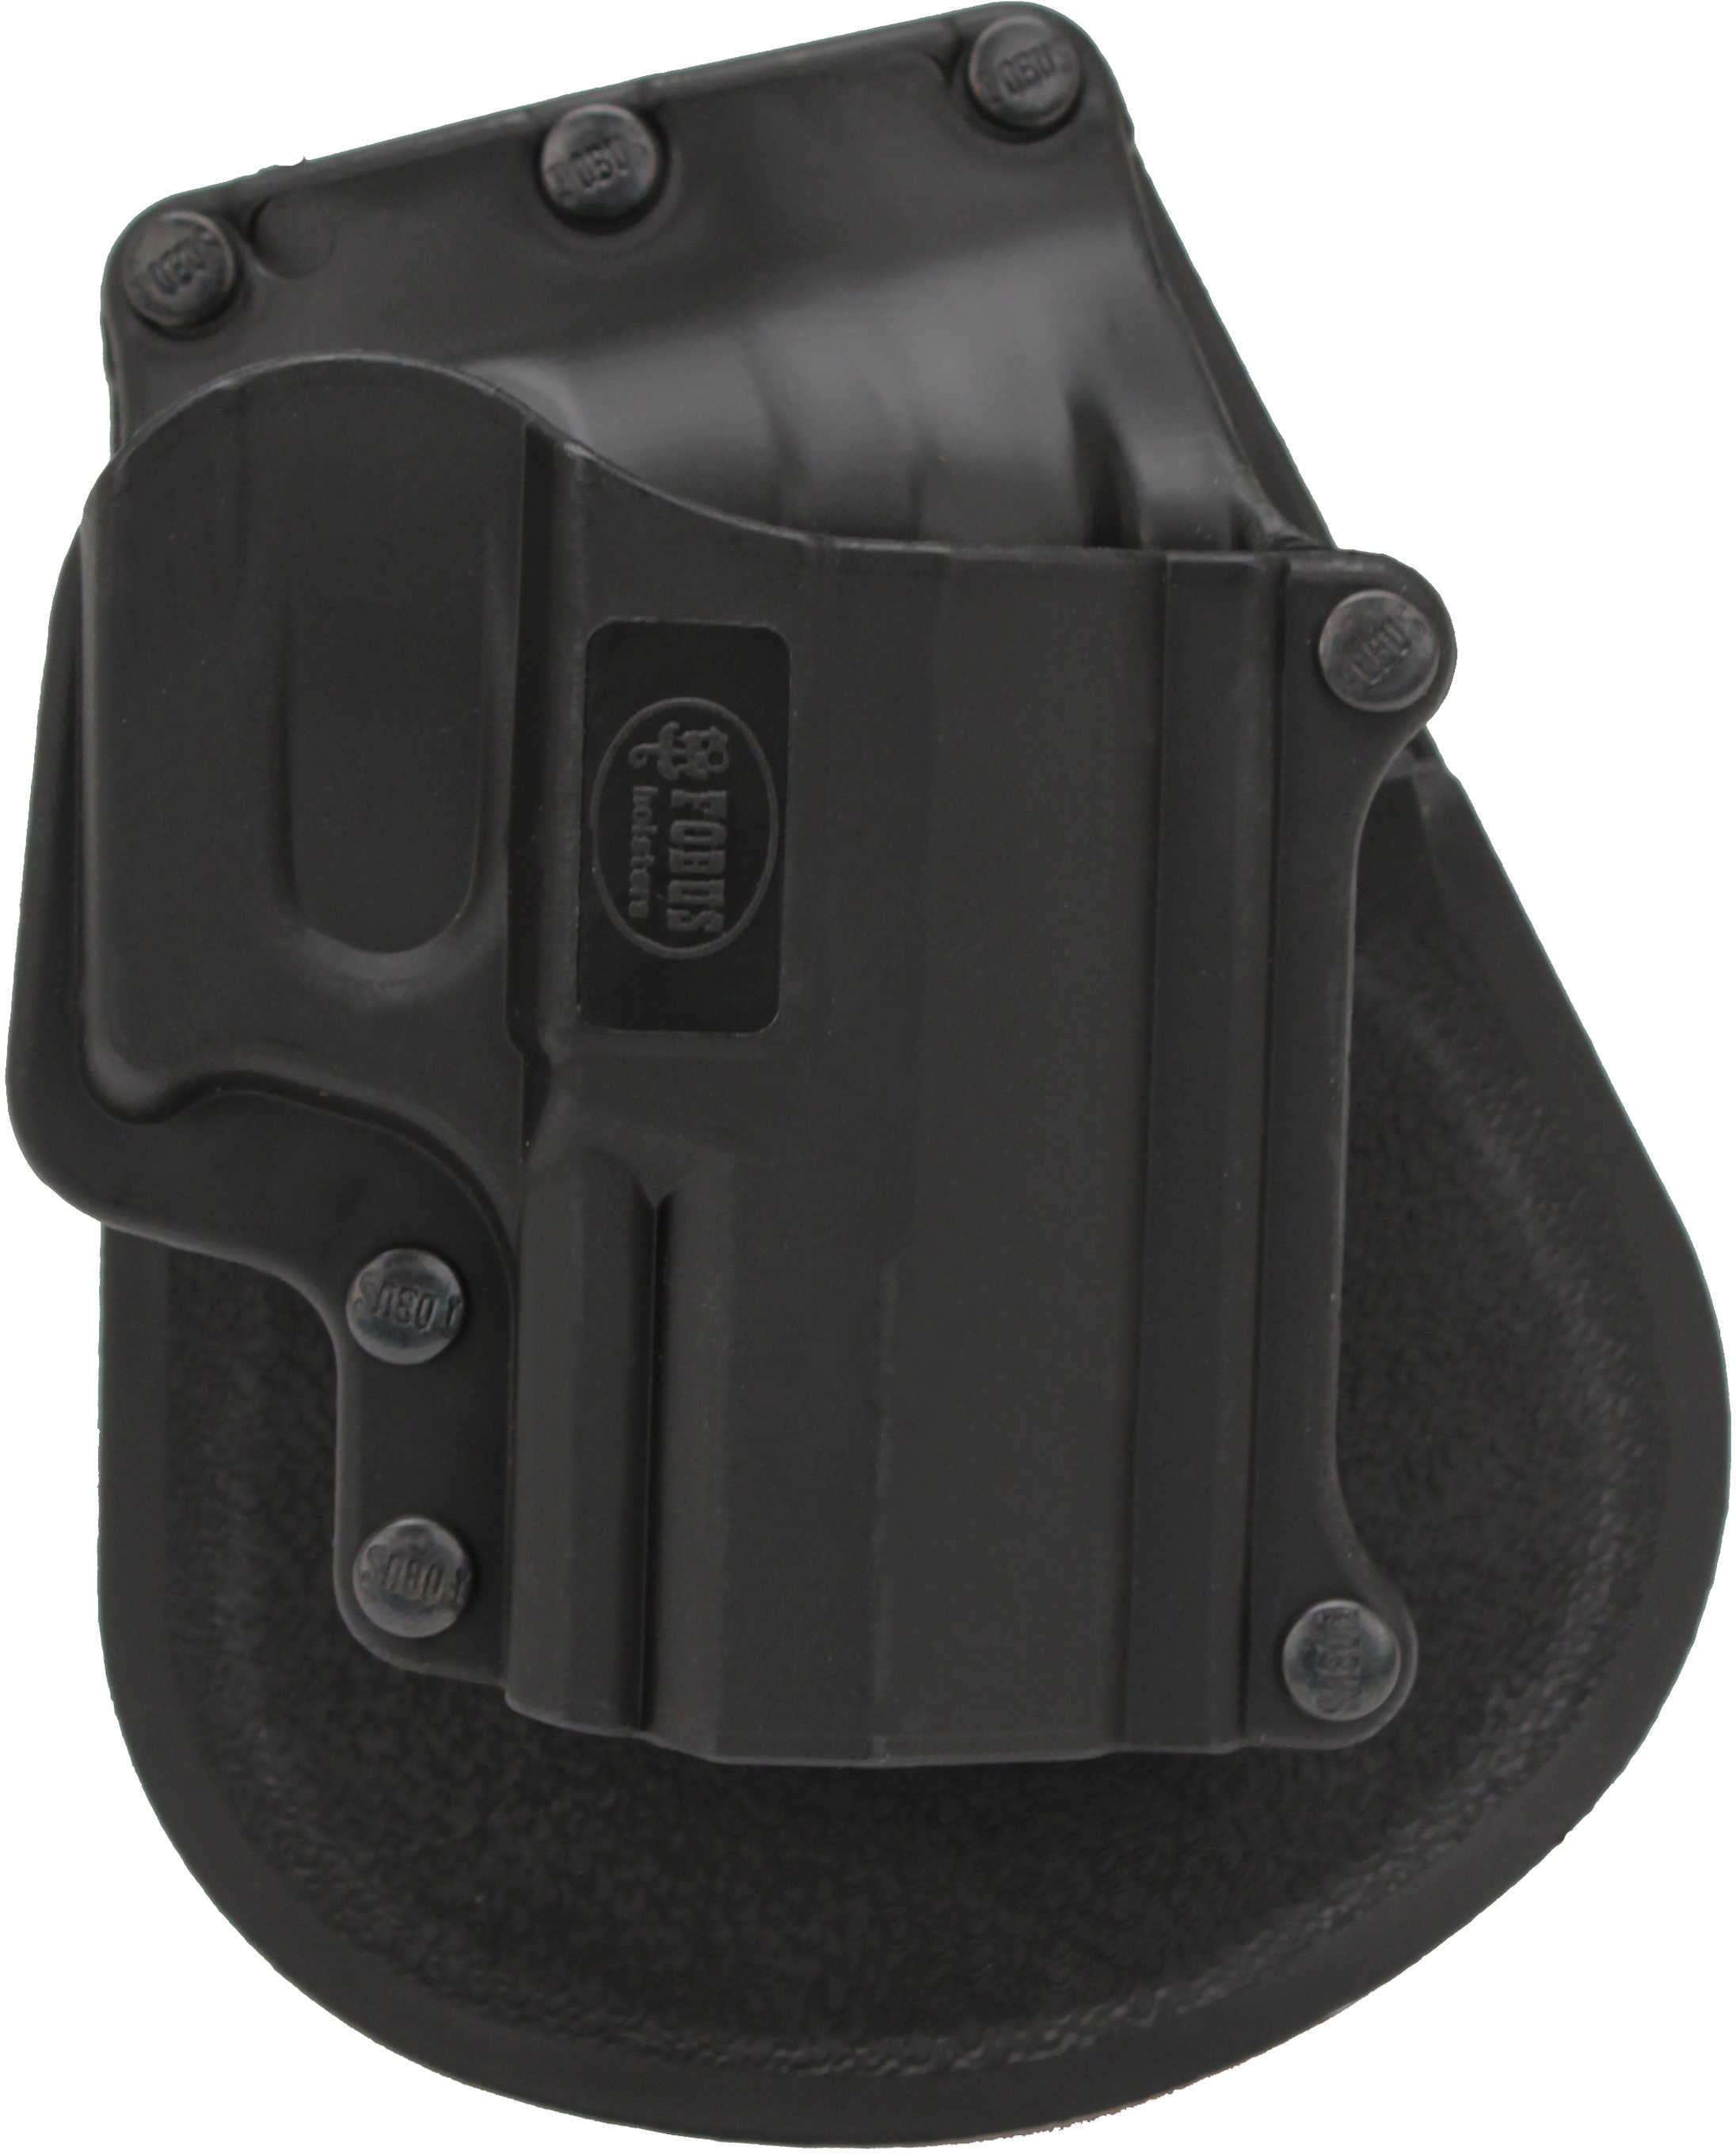 Fobus Standard Paddle Holster For Walther P22 Black Right Hand